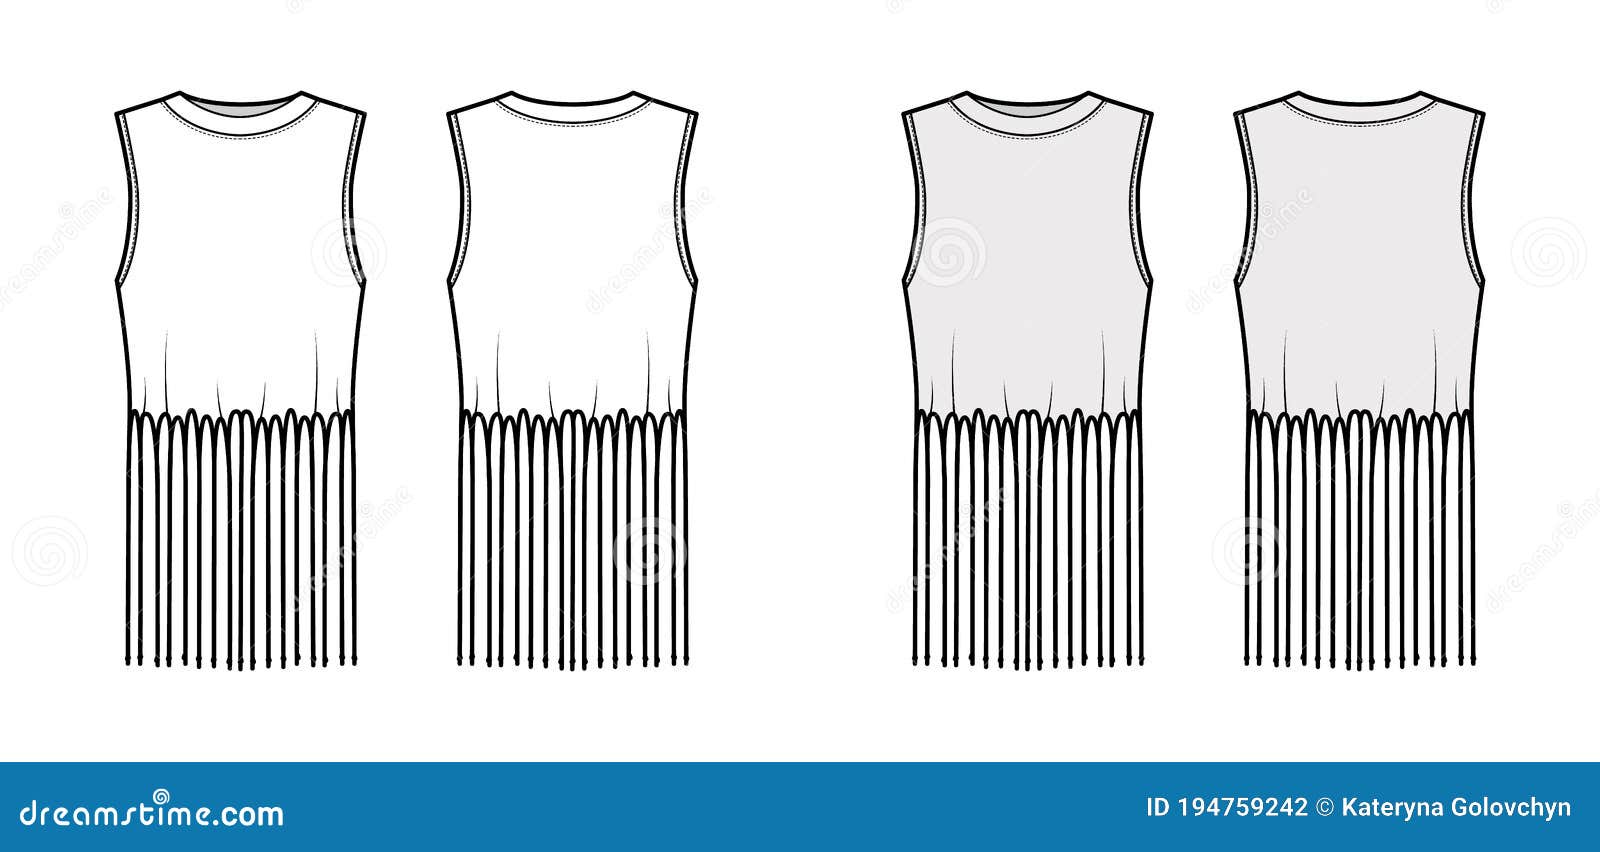 fringed cotton-jersey top technical fashion  with scoop neck, sleeveless, above-the-knee length, oversized